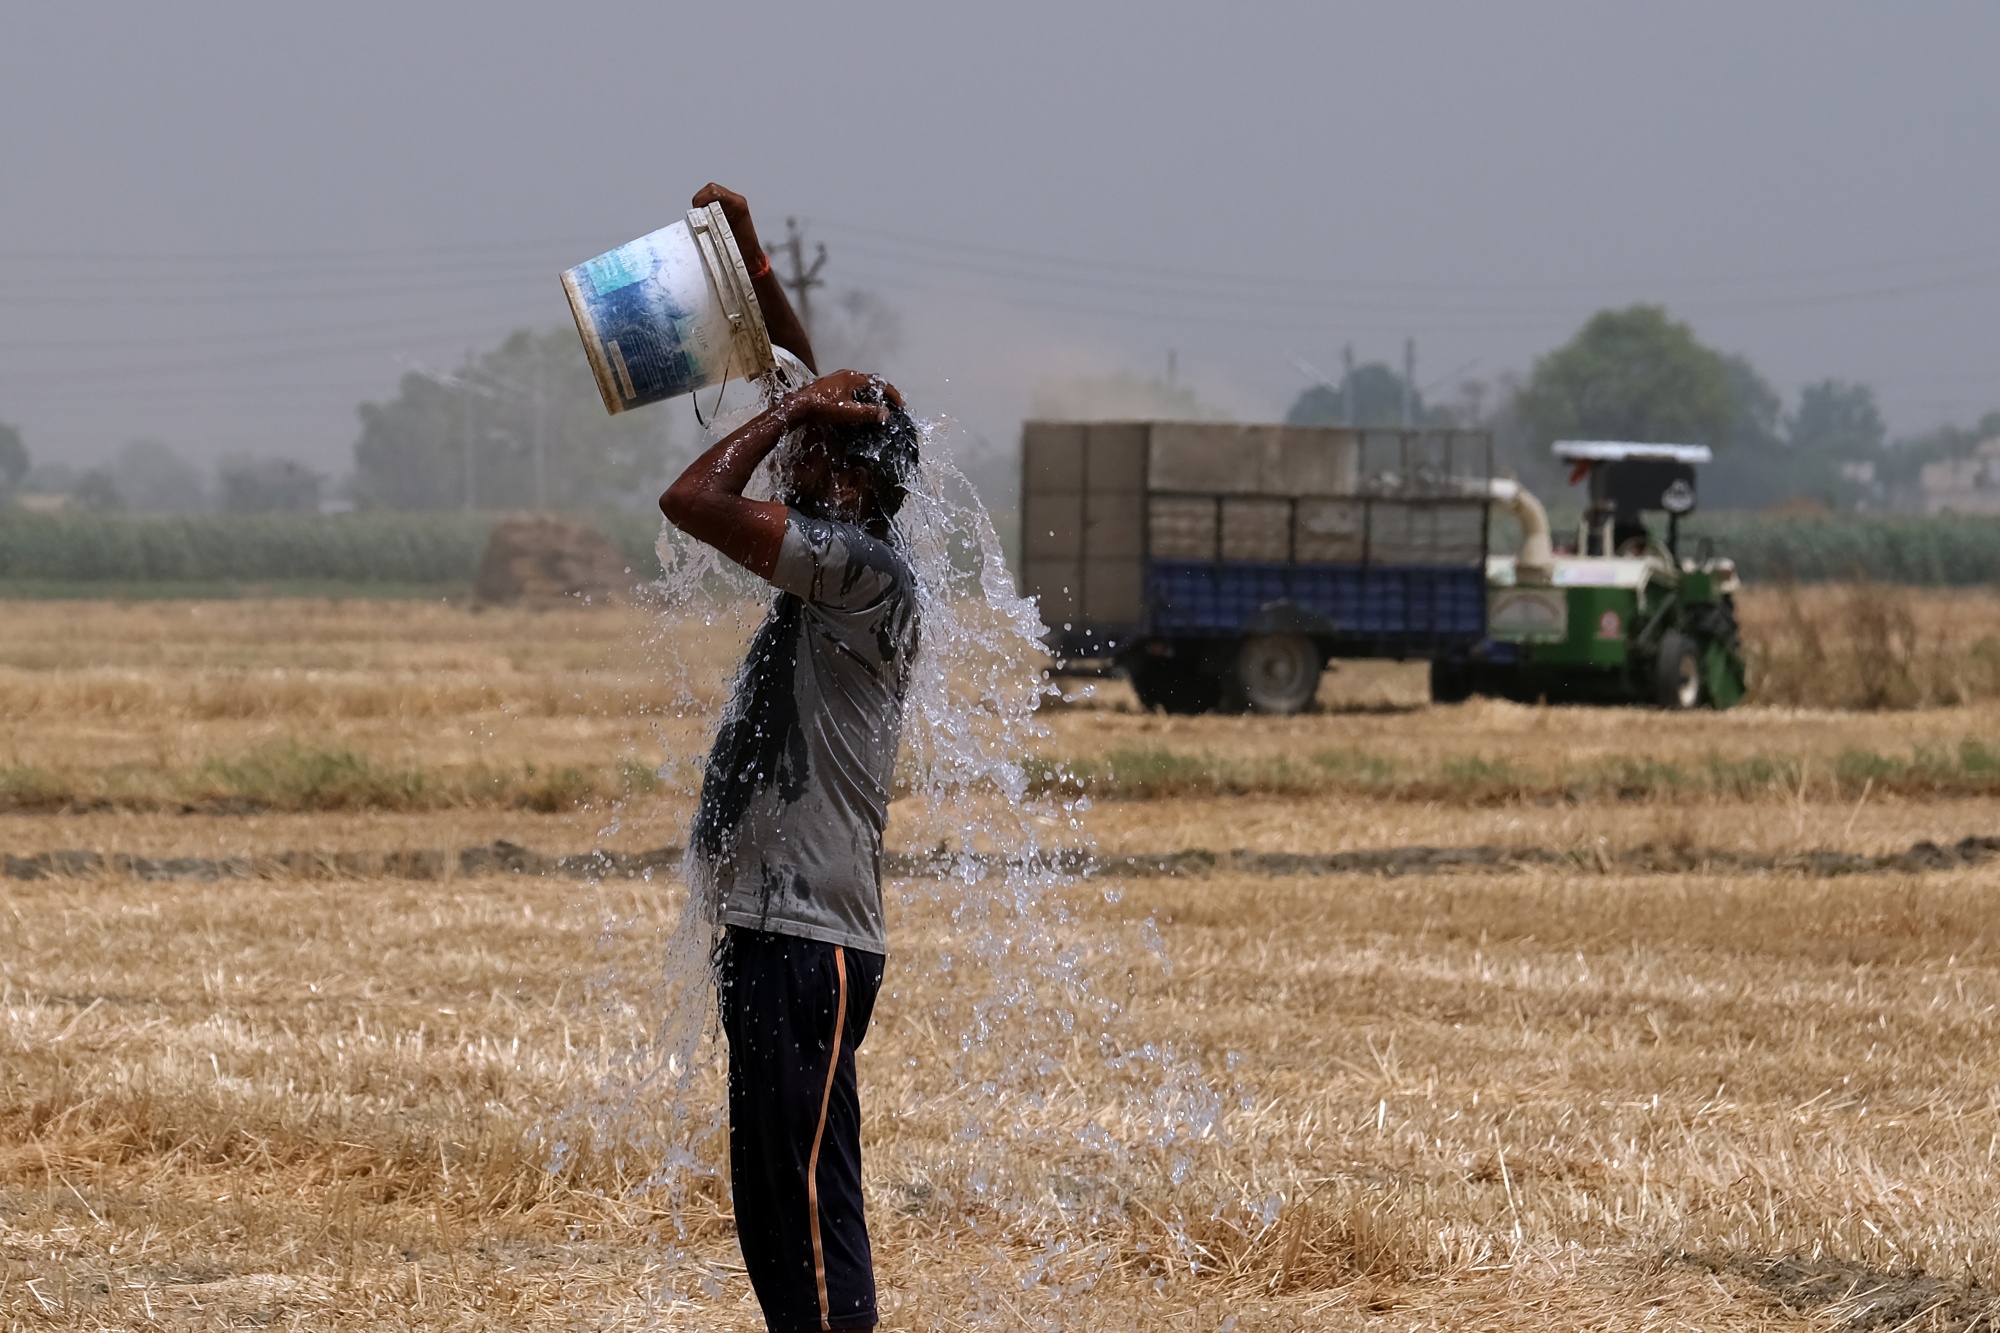 A farmer pours water on himself while working at a wheat farm in Punjab, India in May 2022.&nbsp;